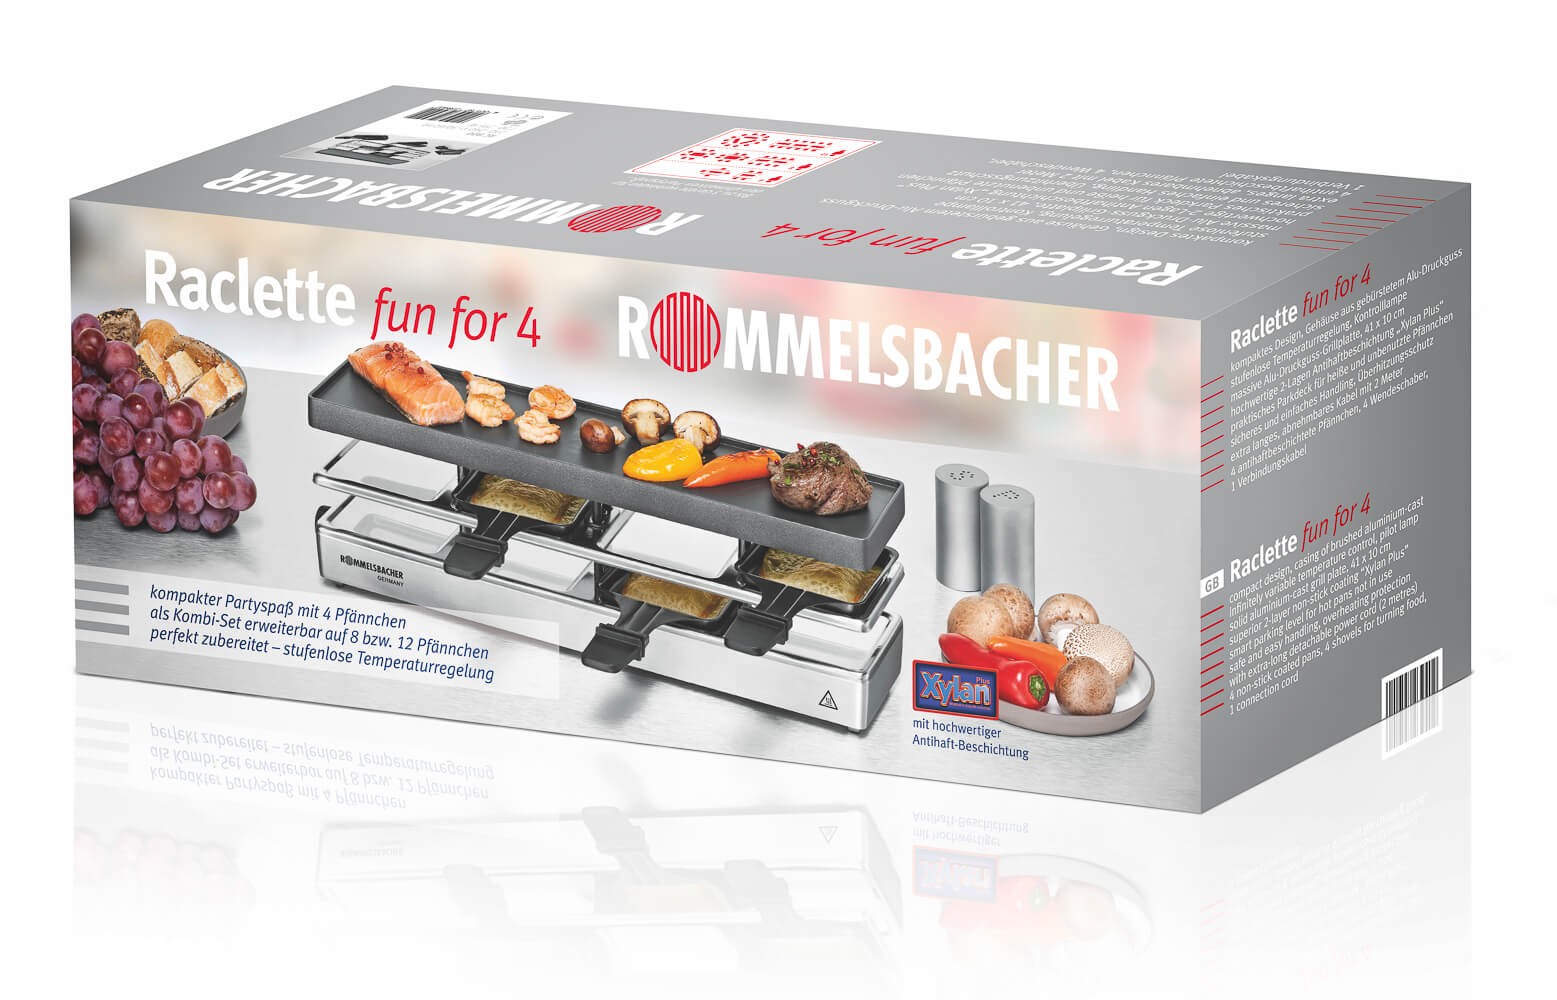 Rommelsbacher RC 800 Raclette Grill Fun for 4